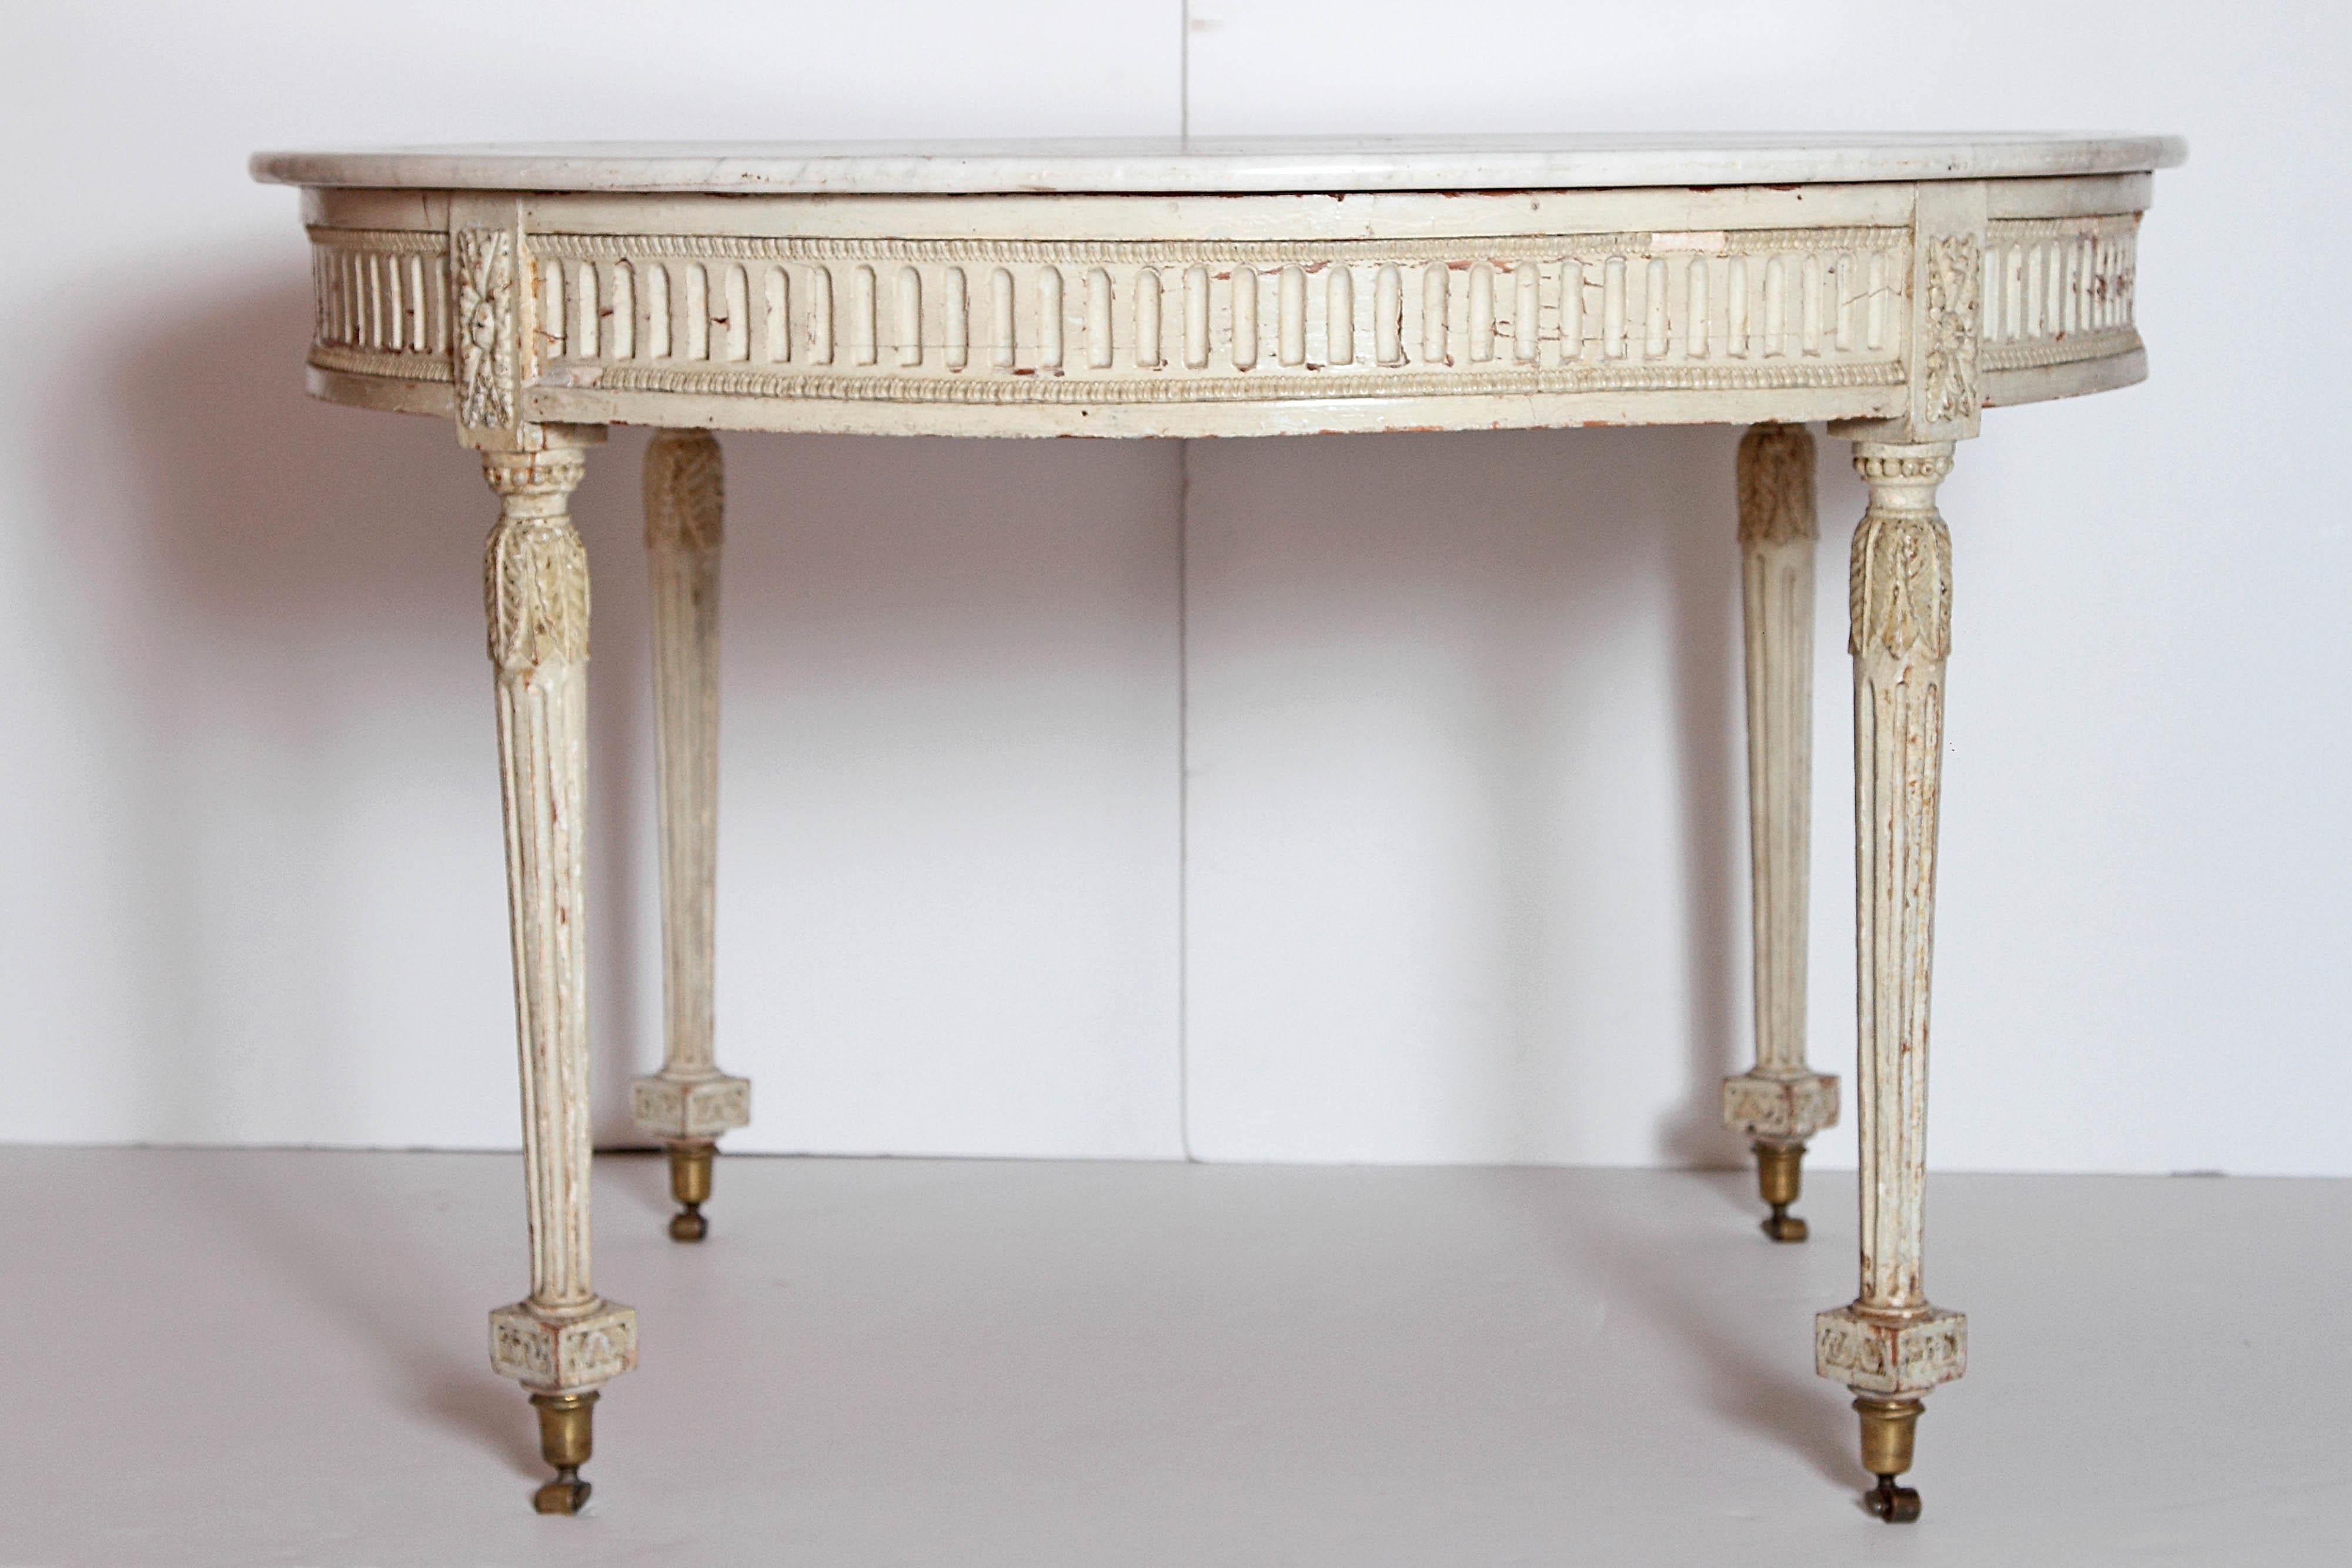 A painted neoclassical round table with its original white and grey veined marble top having an incised reeded design. The table base is painted in a soft white palette that compliments the marble top and the neoclassical lines. The marble top sits